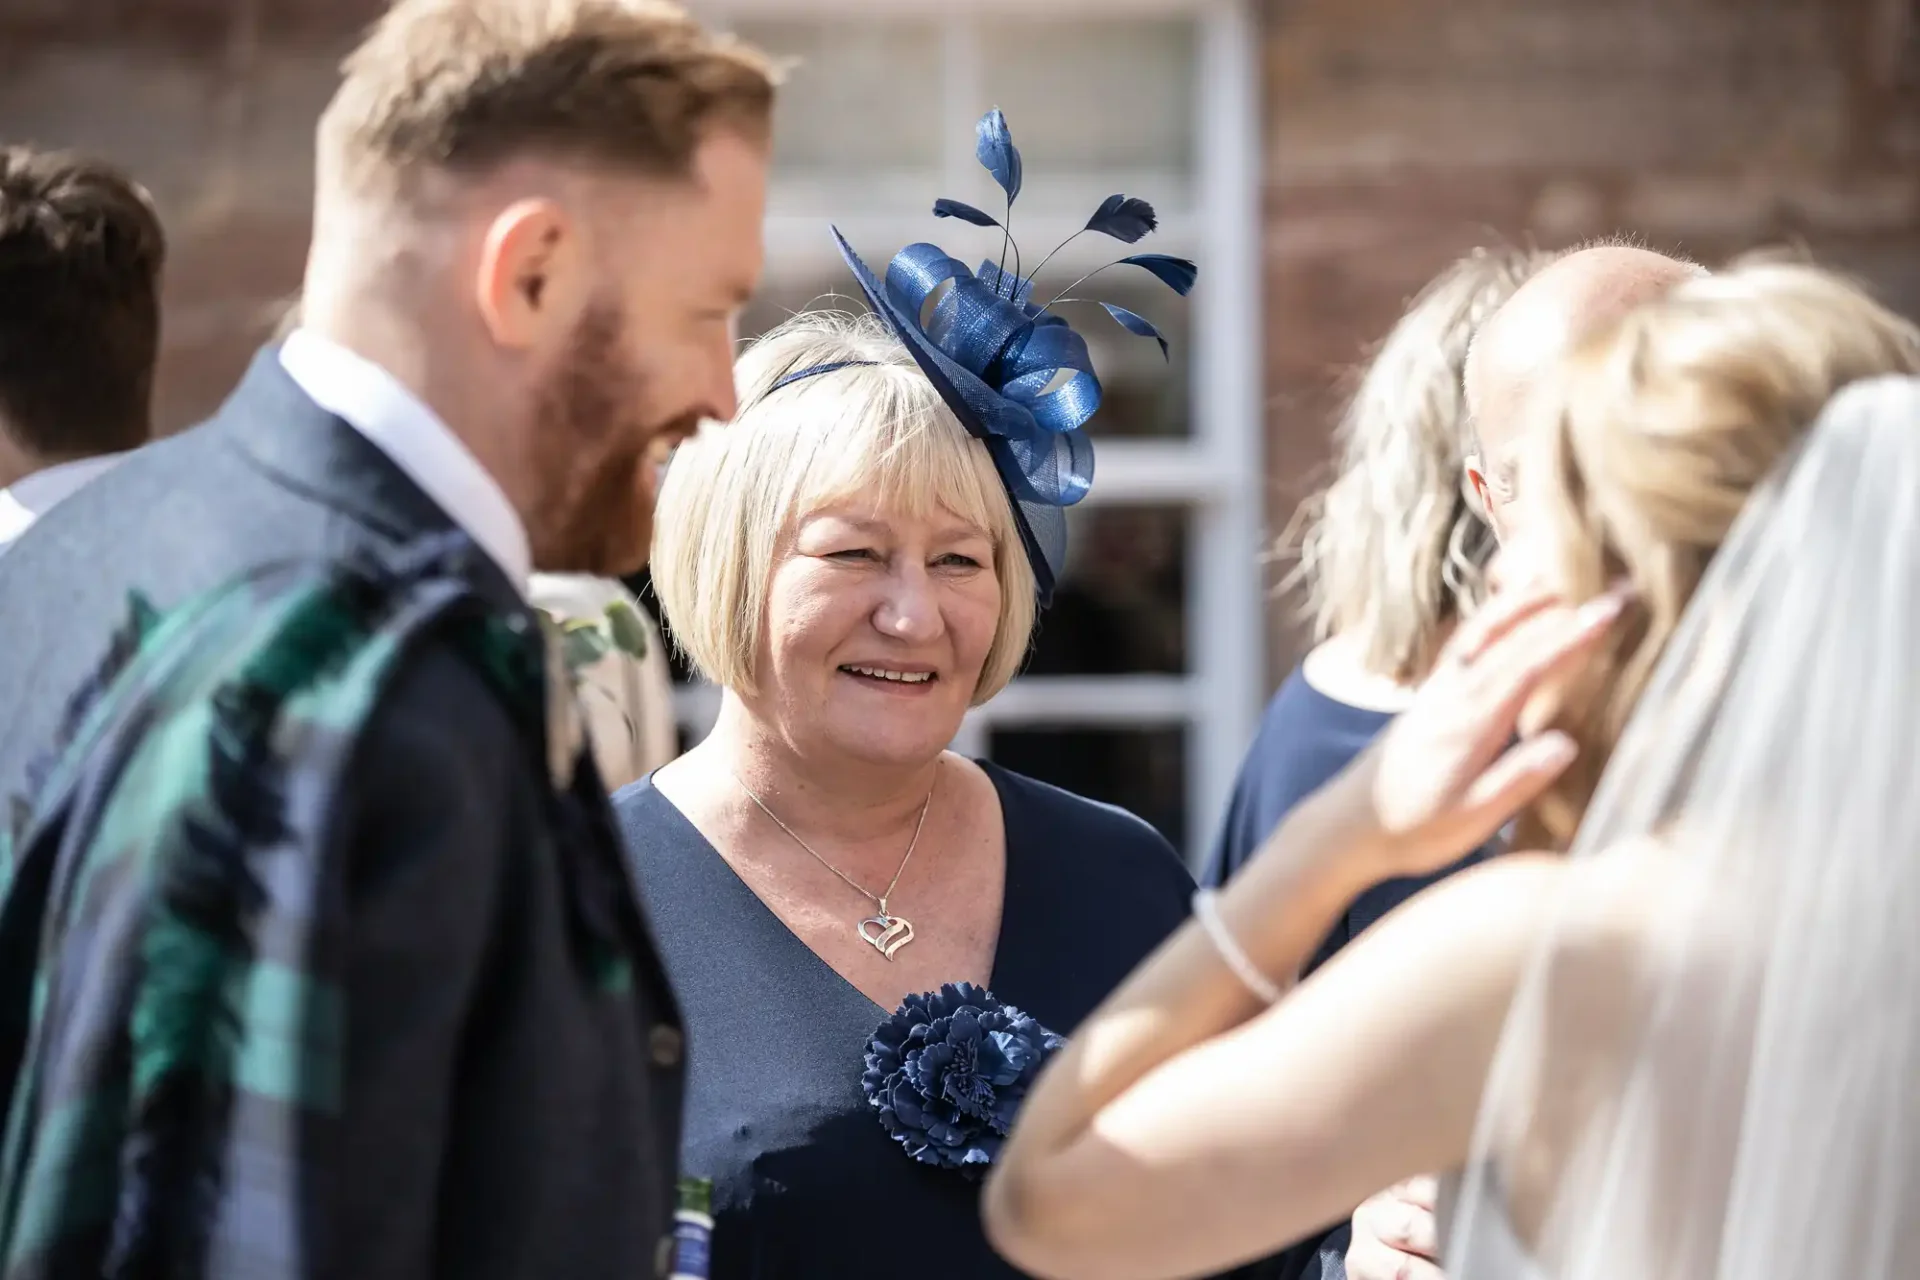 Smiling woman in a blue hat and floral dress at a sunny wedding reception, talking with guests including a man in a tartan waistcoat.